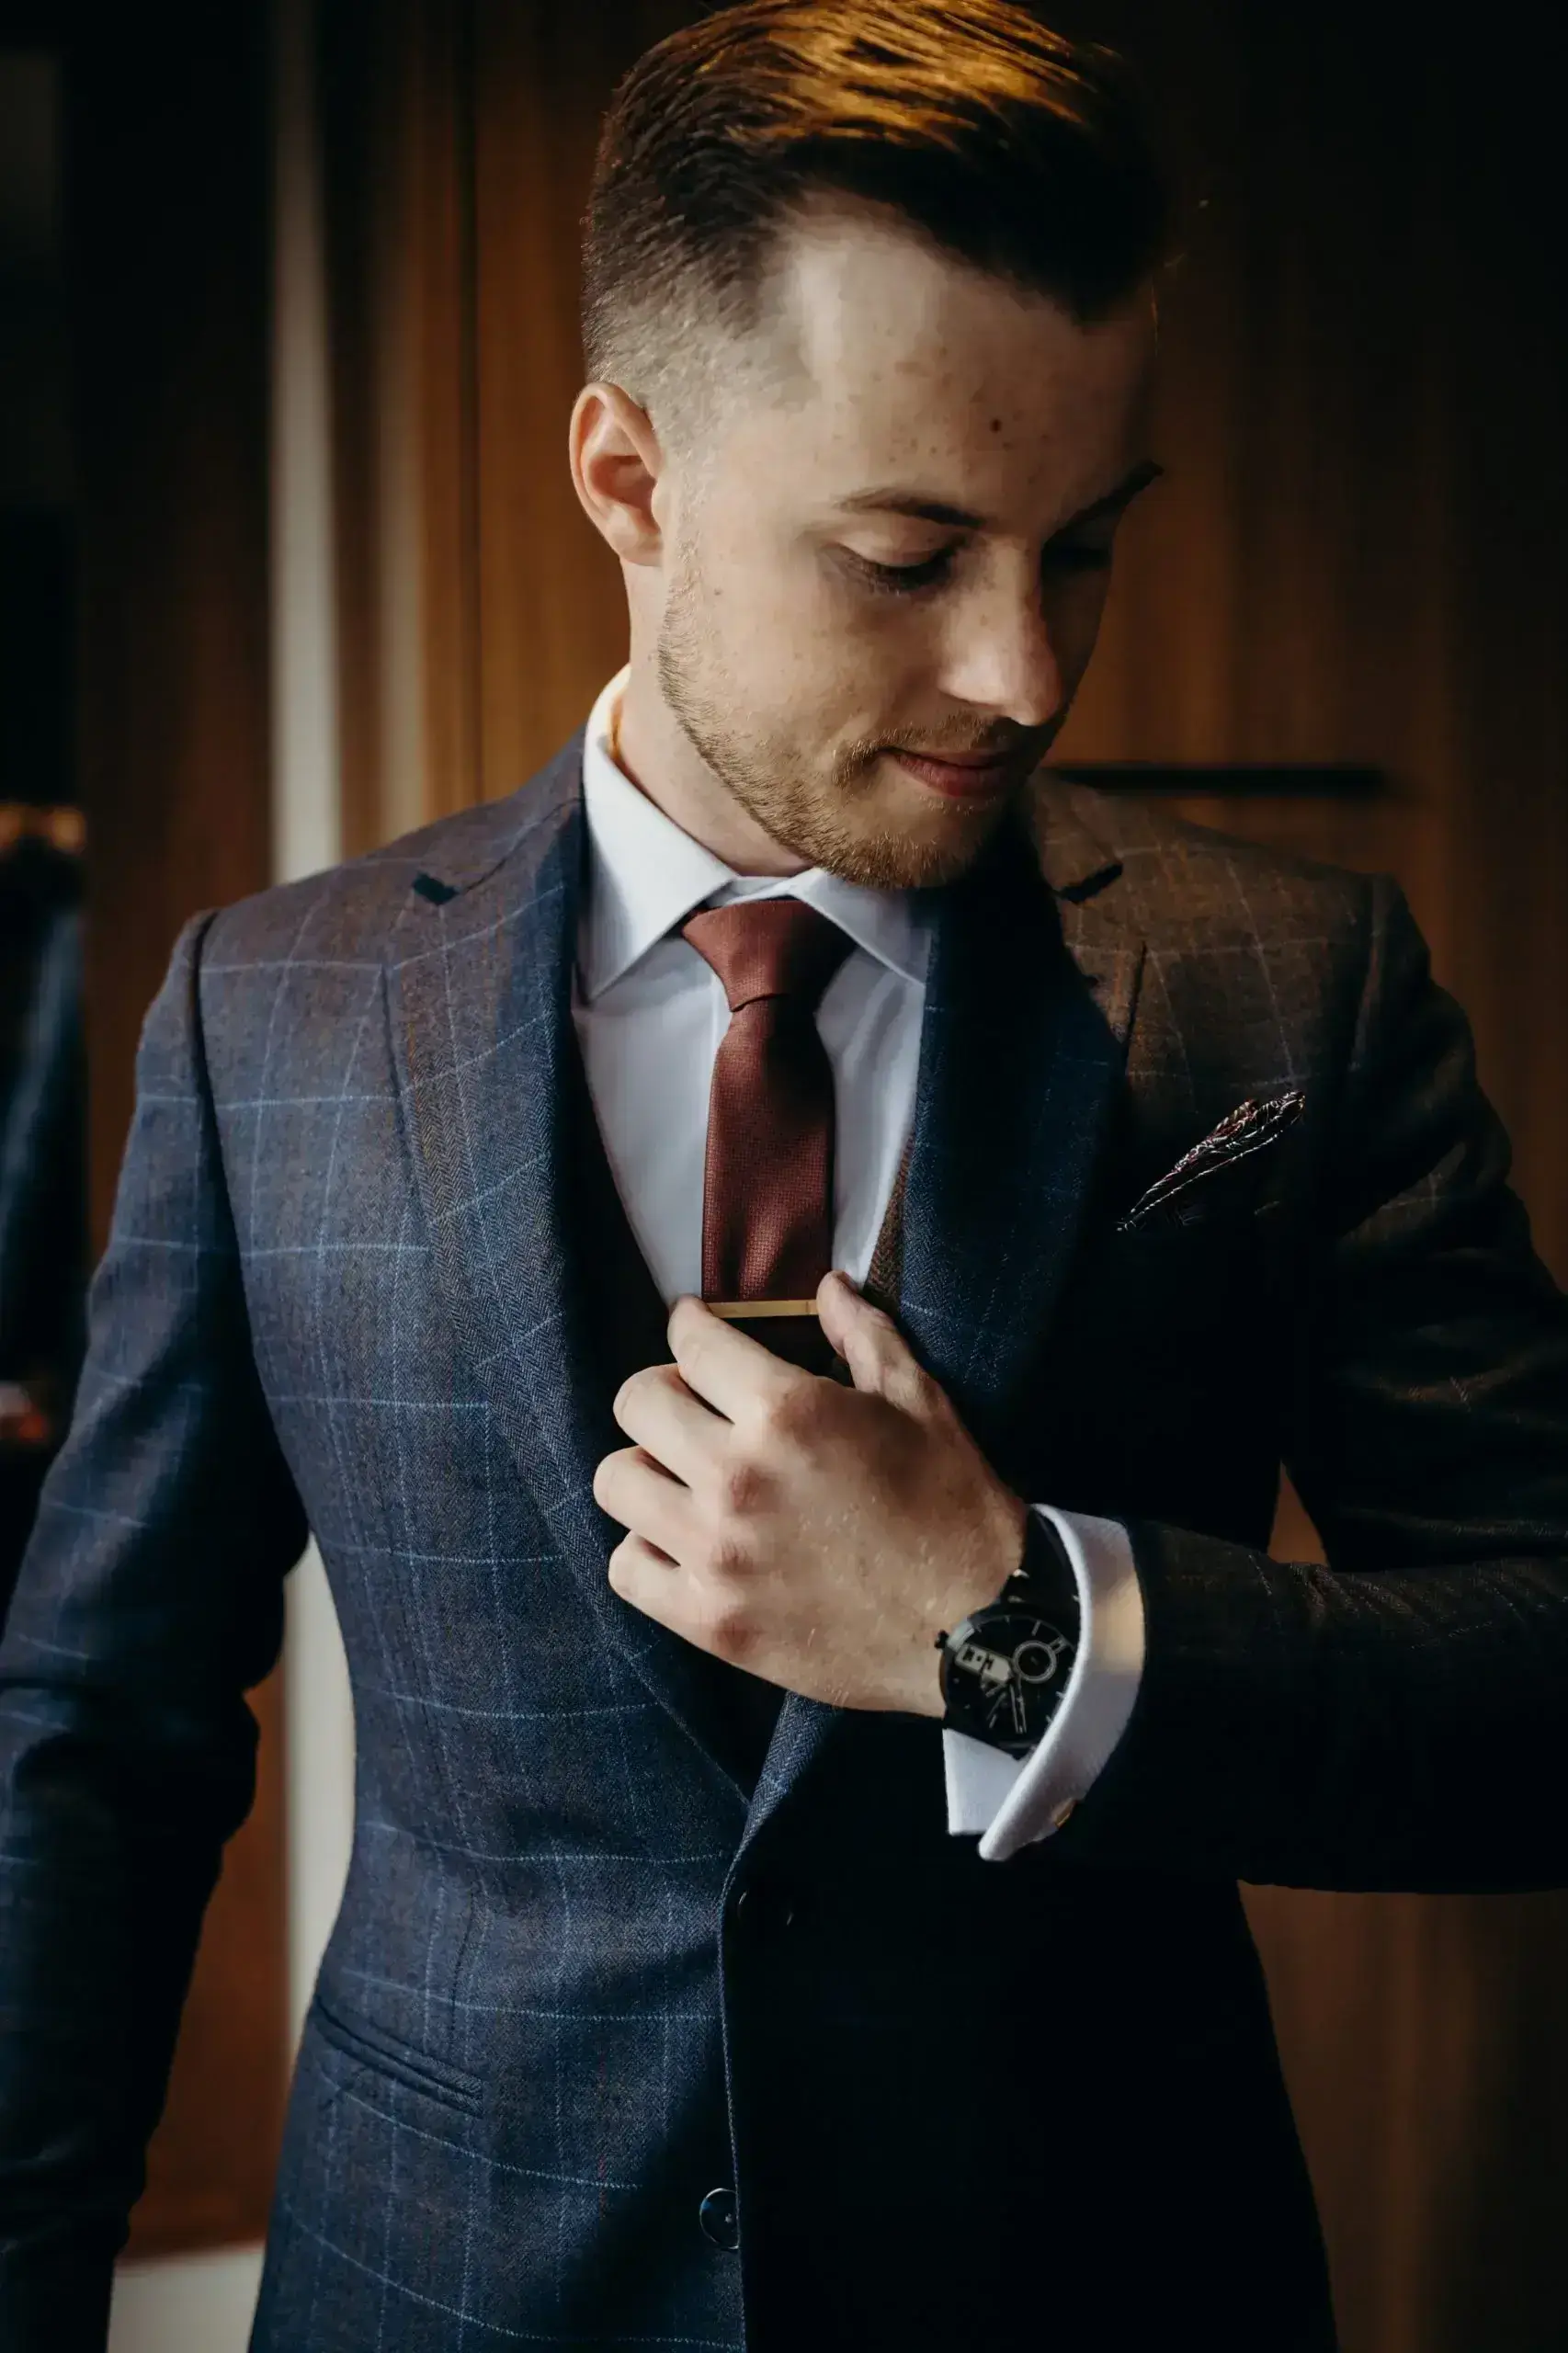 British suit, Italian suit and American suit, which style suits